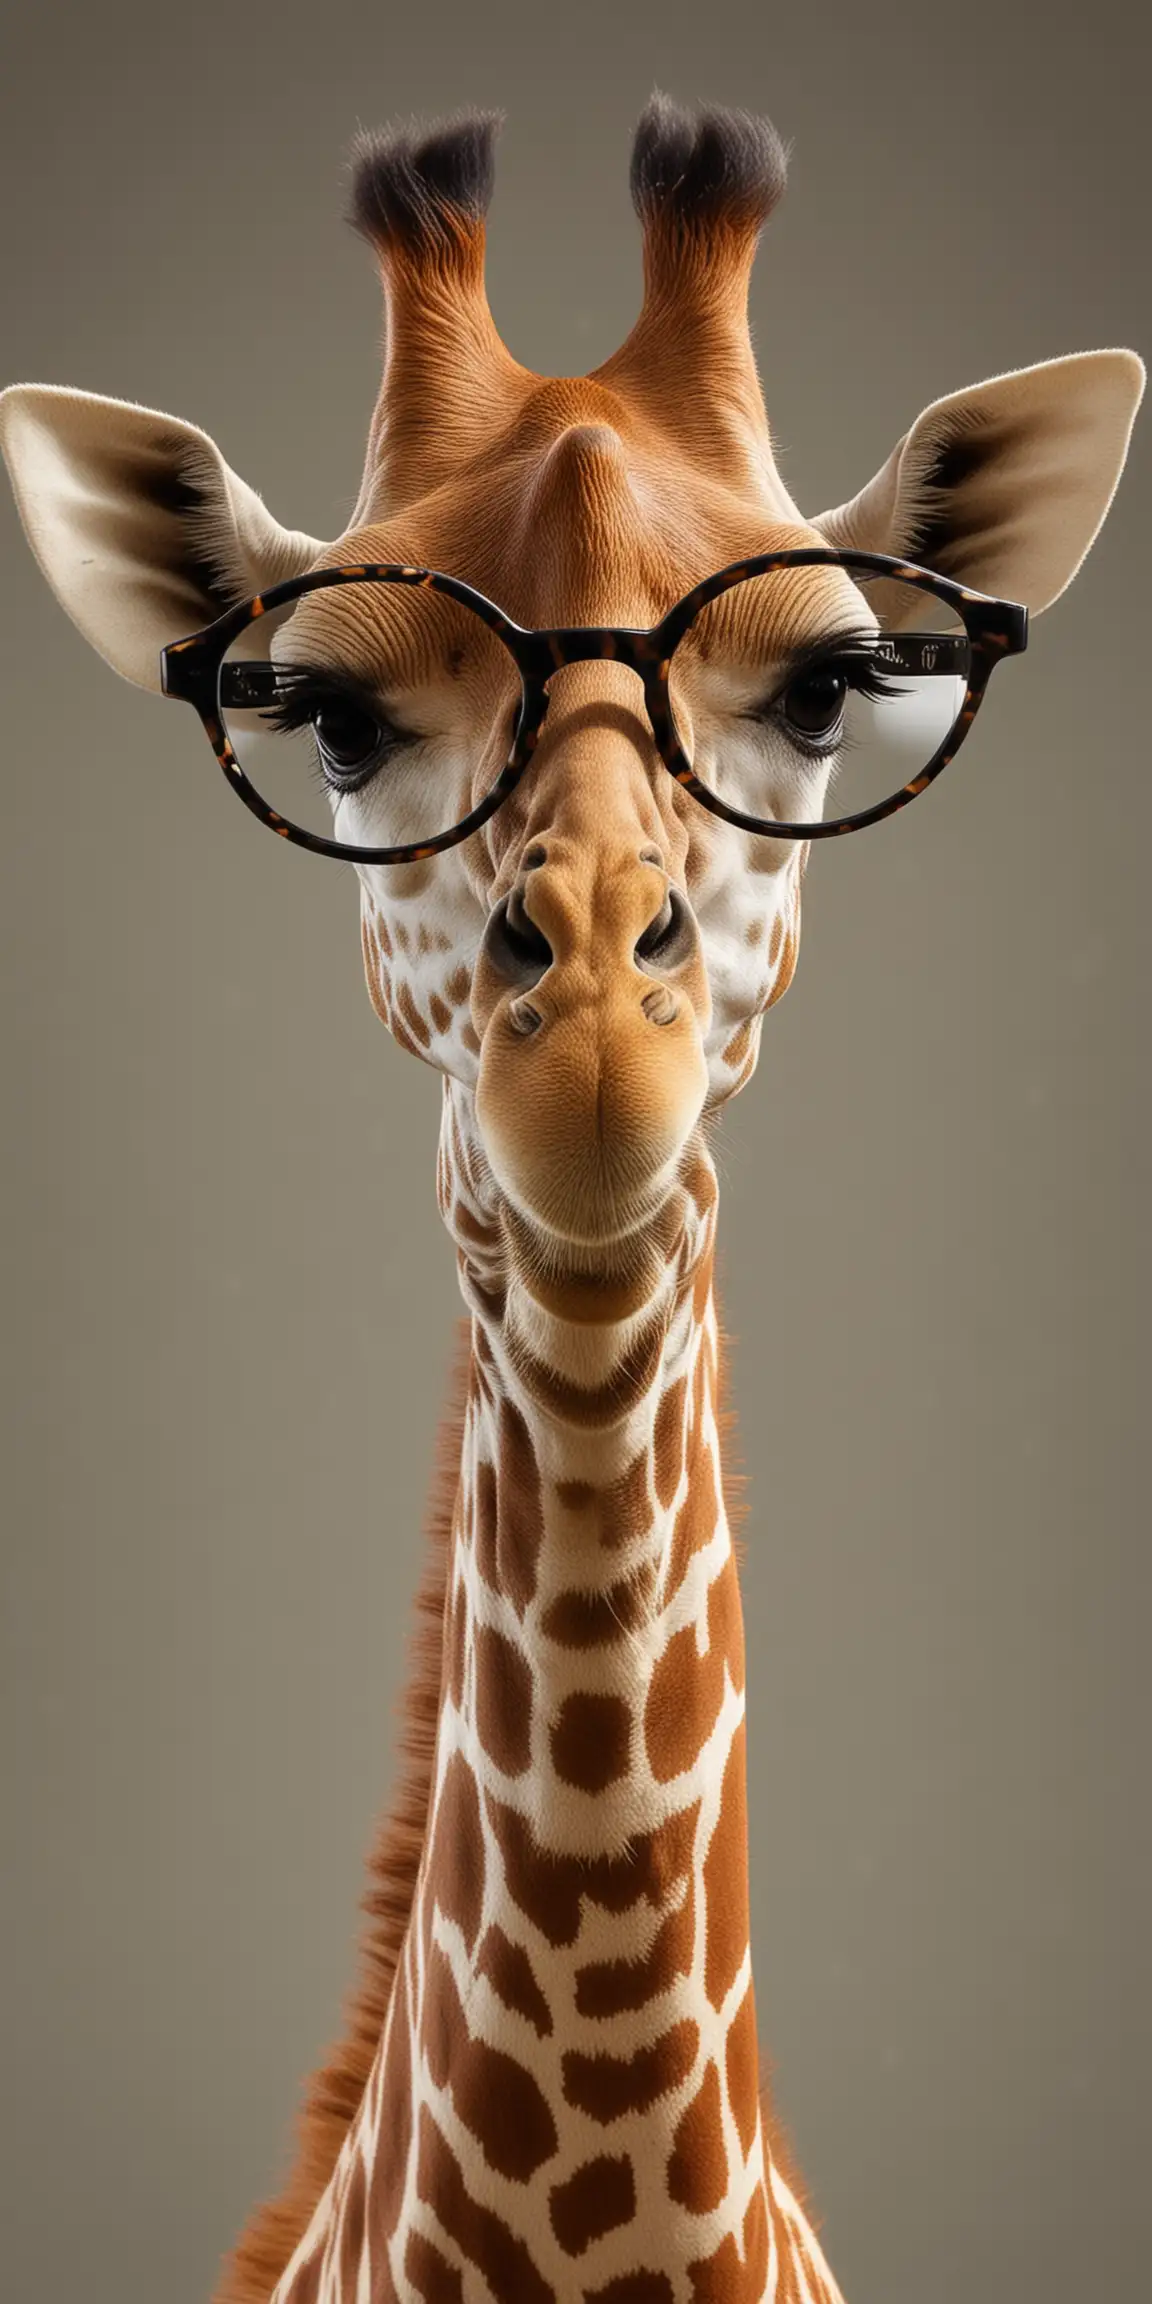 Giraffe Wearing Glasses Quirky and Intellectual Animal Portrait